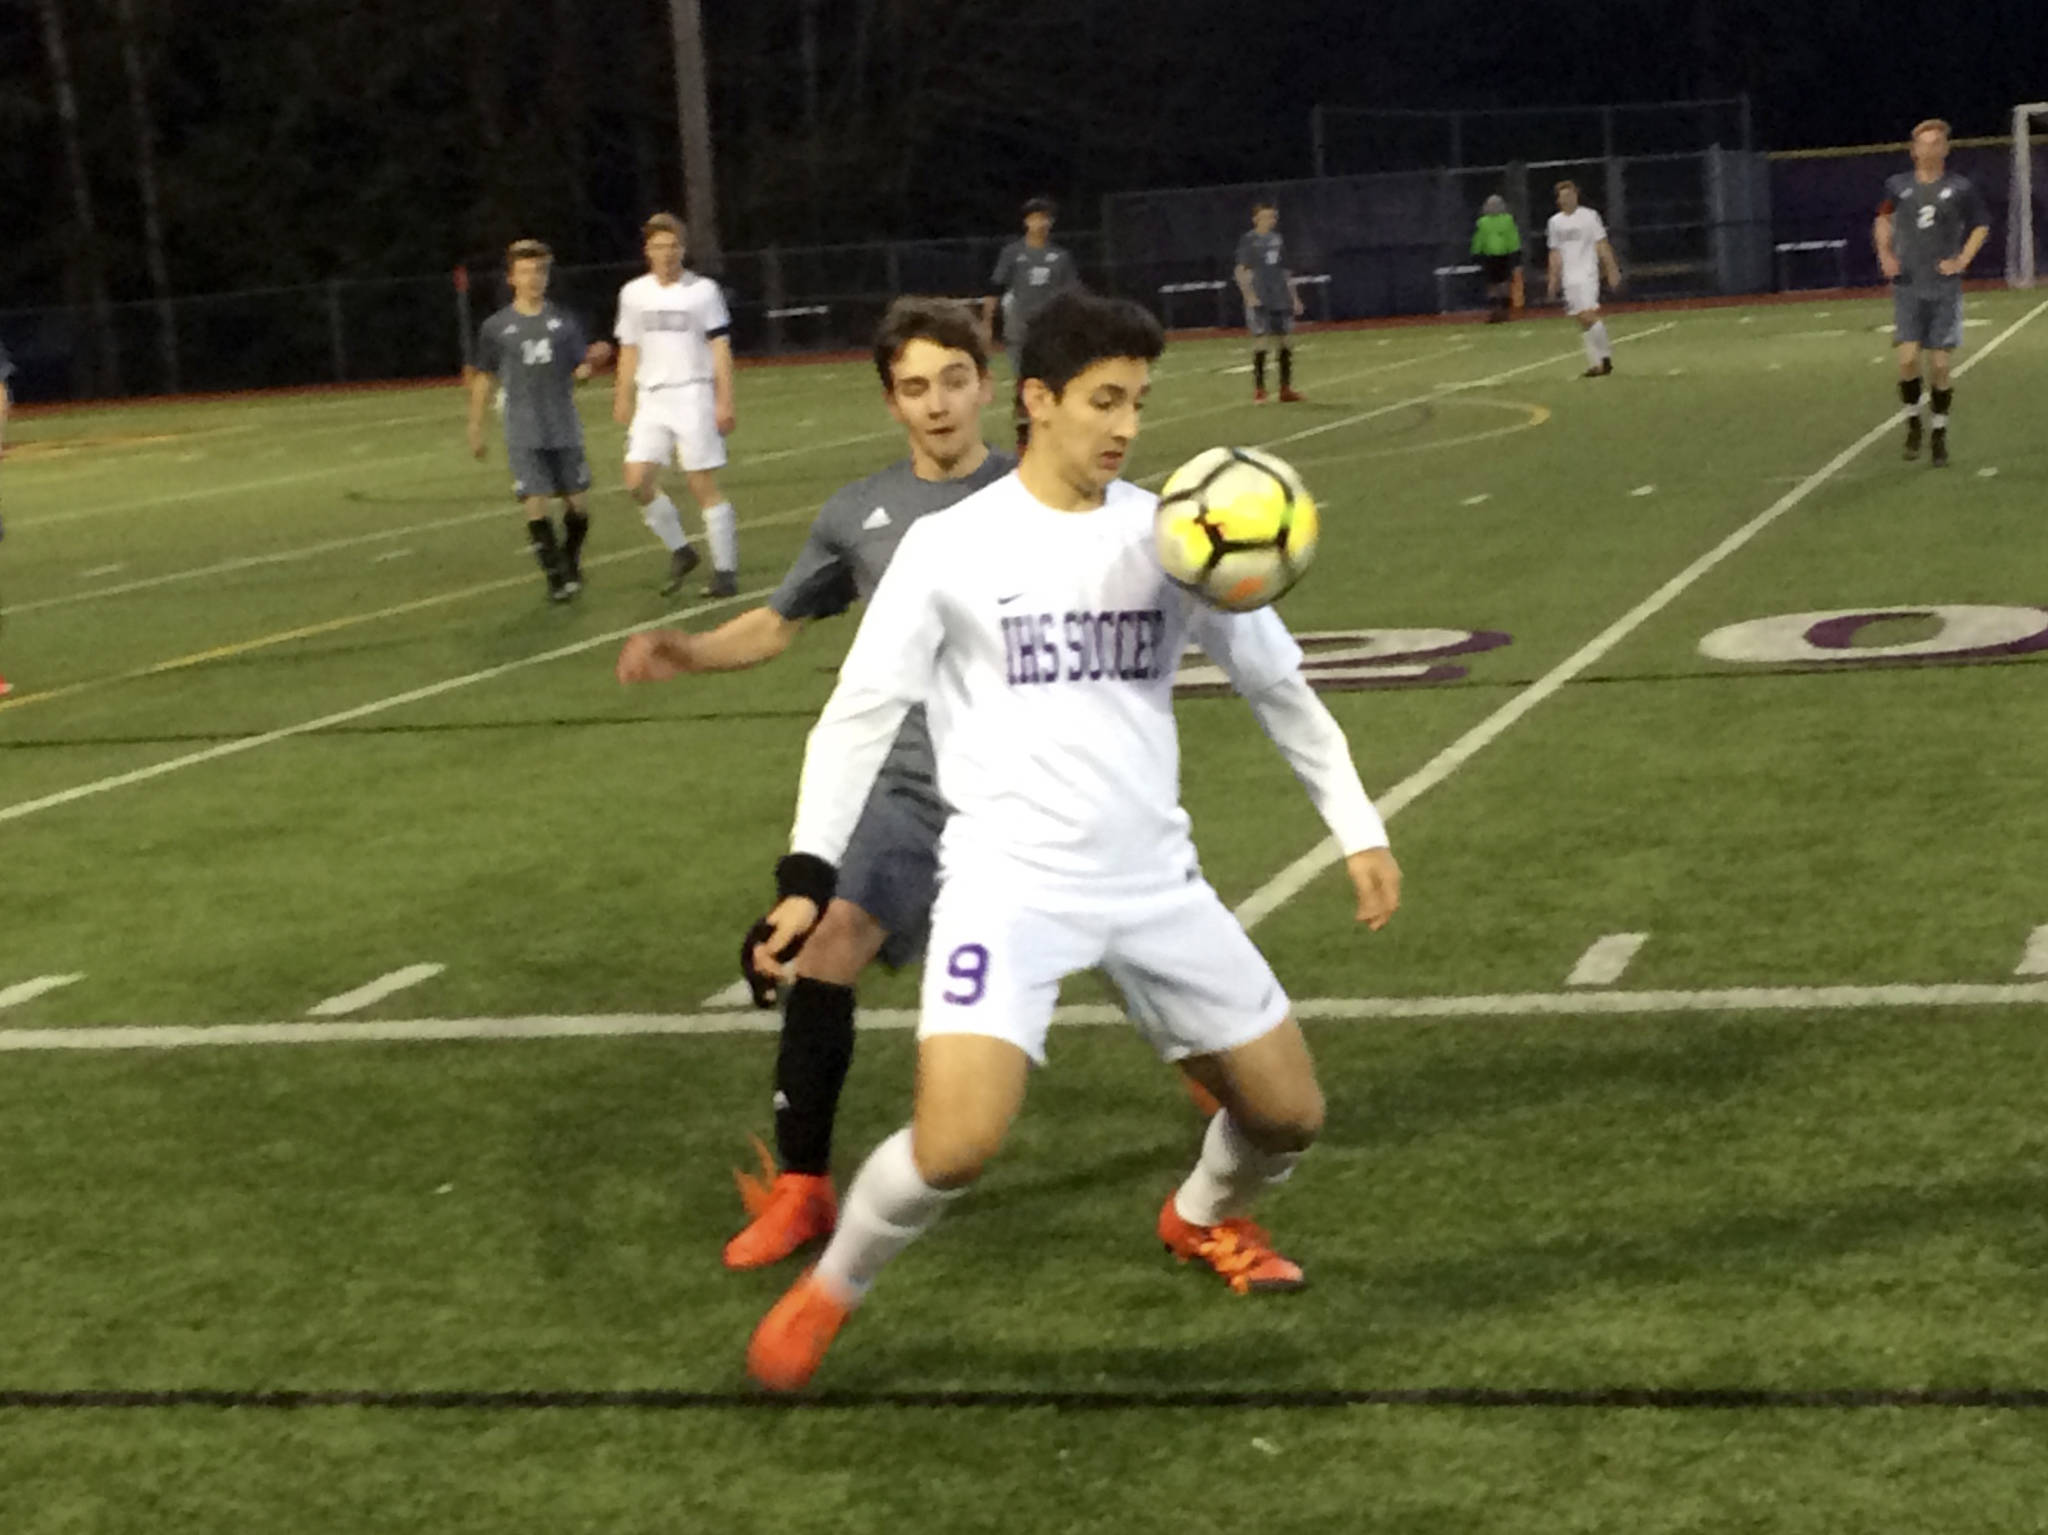 Shaun Scott, staff photo                                Issaquah Eagles forward Jacob Barsher controls the ball while being guarded by Mount Si’s Inaki McCarthy in the first half of play. Issaquah defeated Mount Si 2-0 in overtime on March 24 at Gary Moore Stadium in Issaquah.